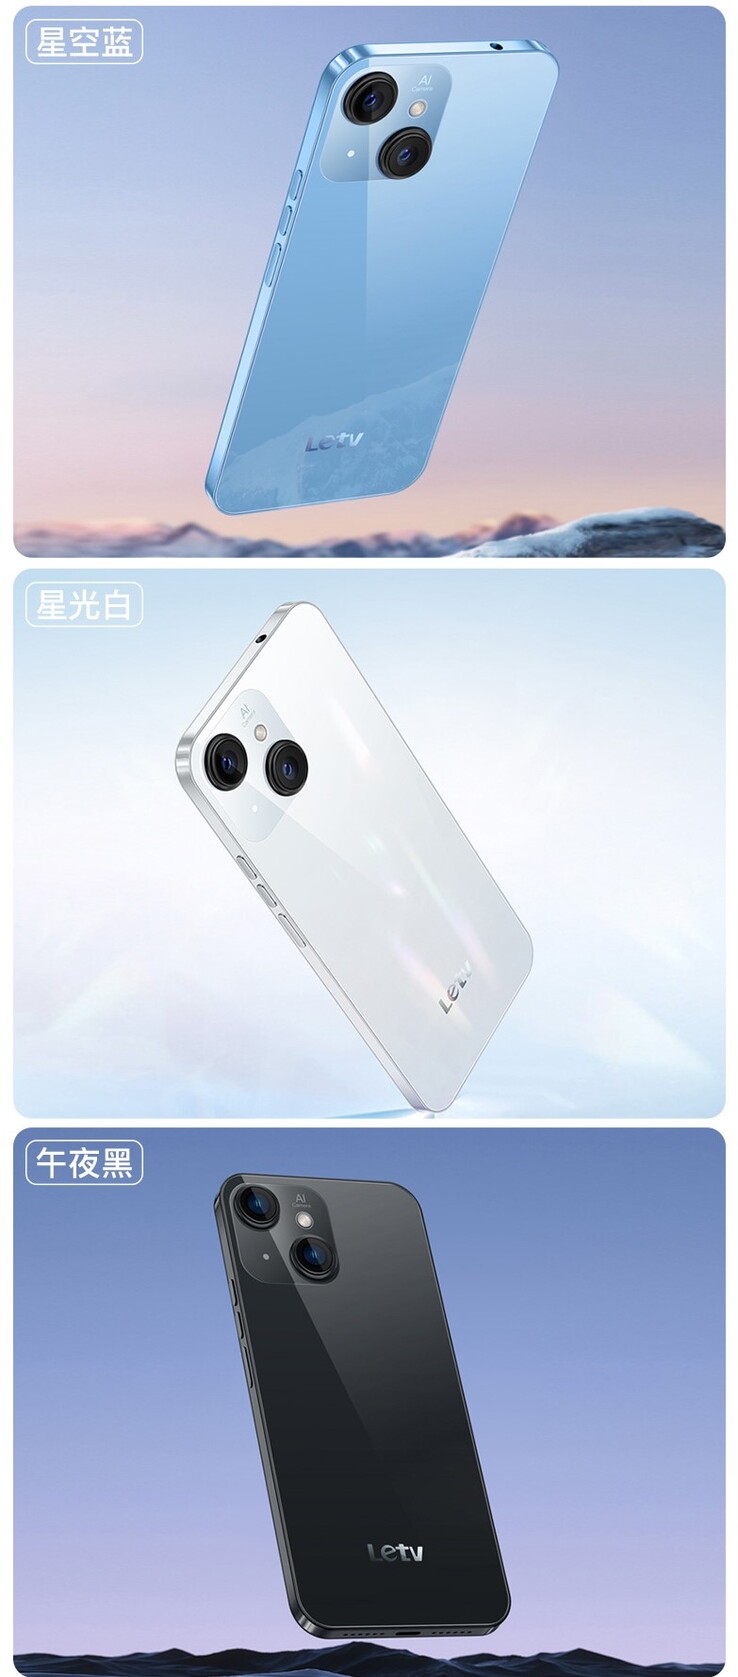 The Y1 Pro will be available in blue, white or black. (Source: Letv)